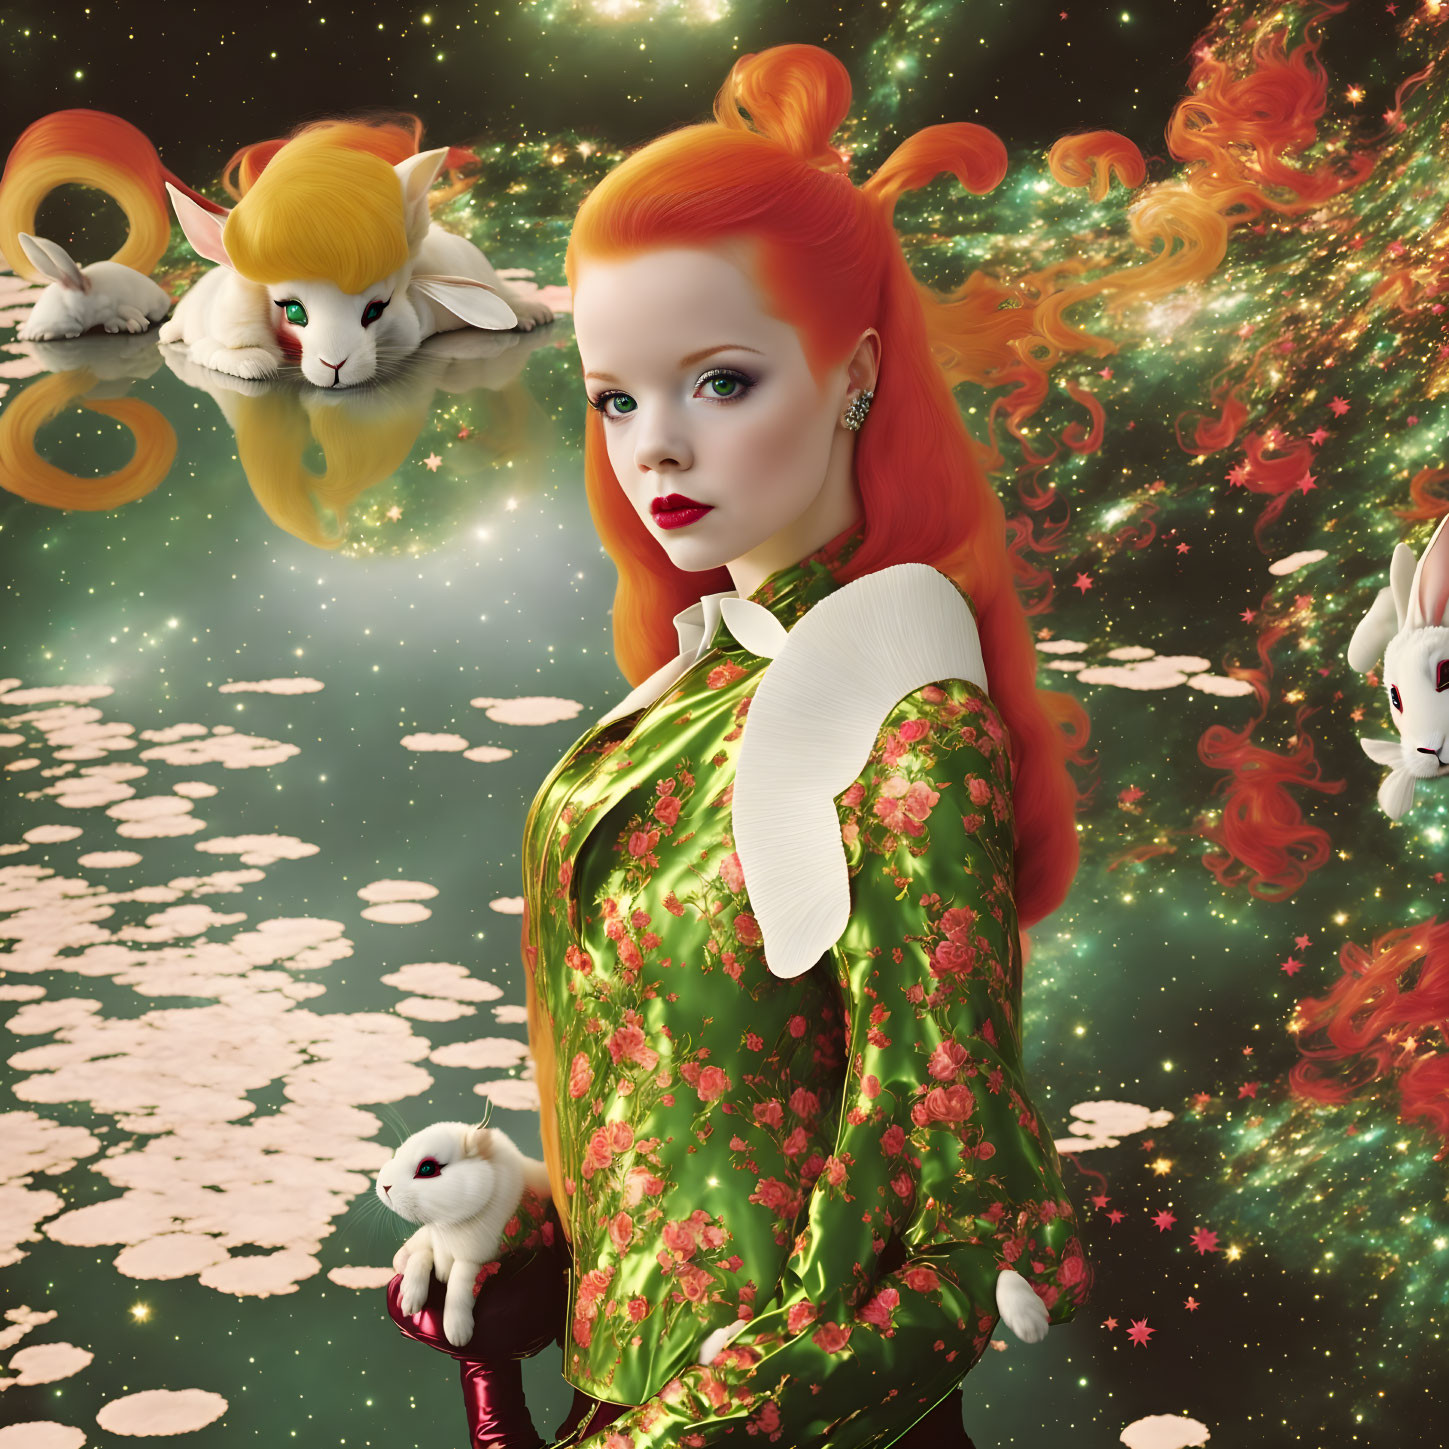 Surreal portrait of woman with red hair in floral dress surrounded by white rabbits in cosmic scene